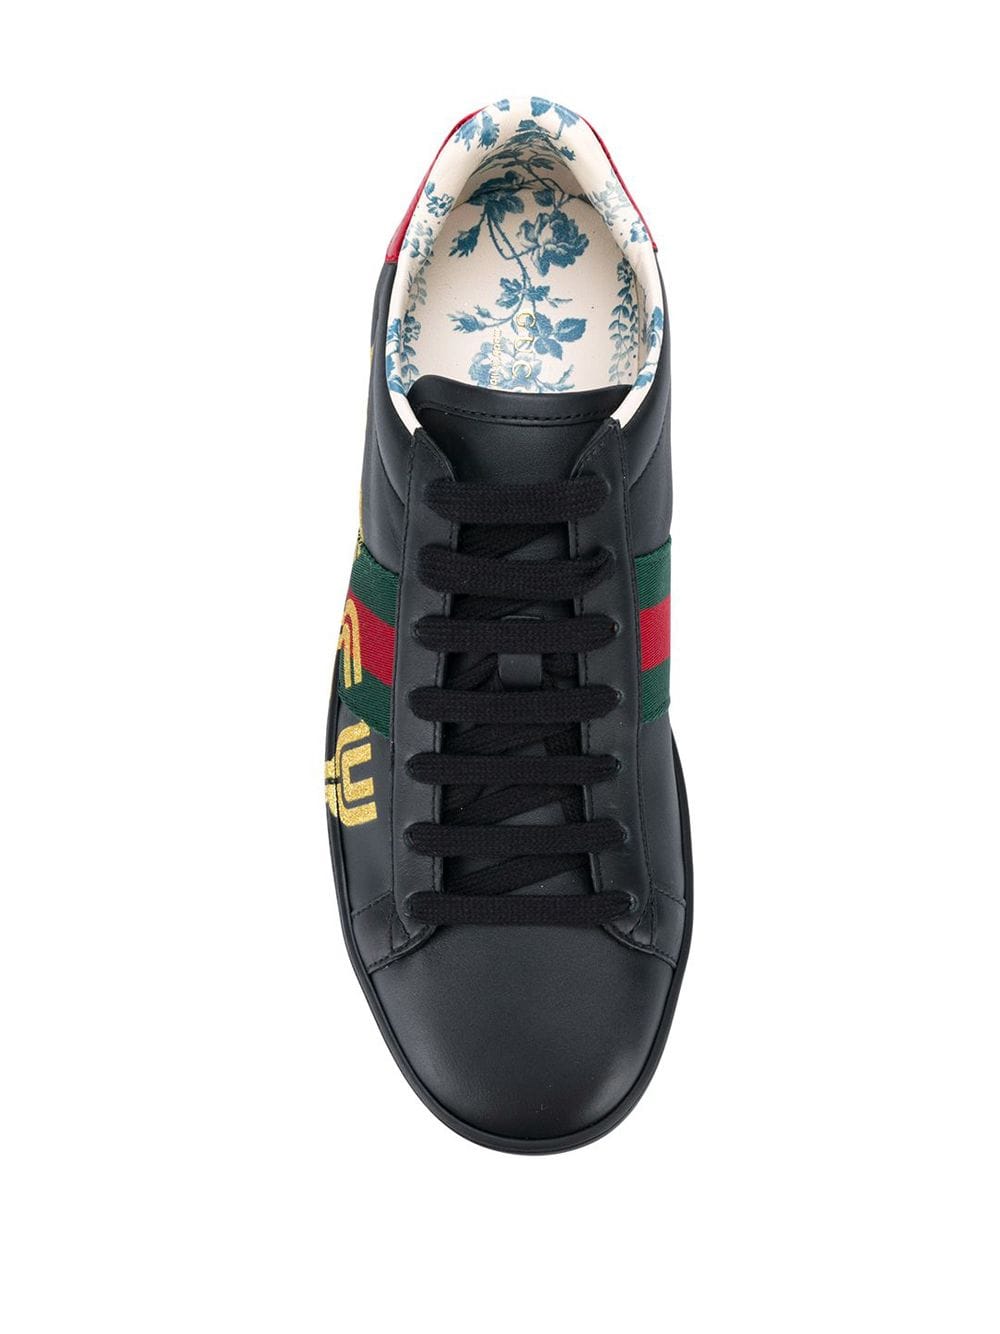 Guccy logo sneakers